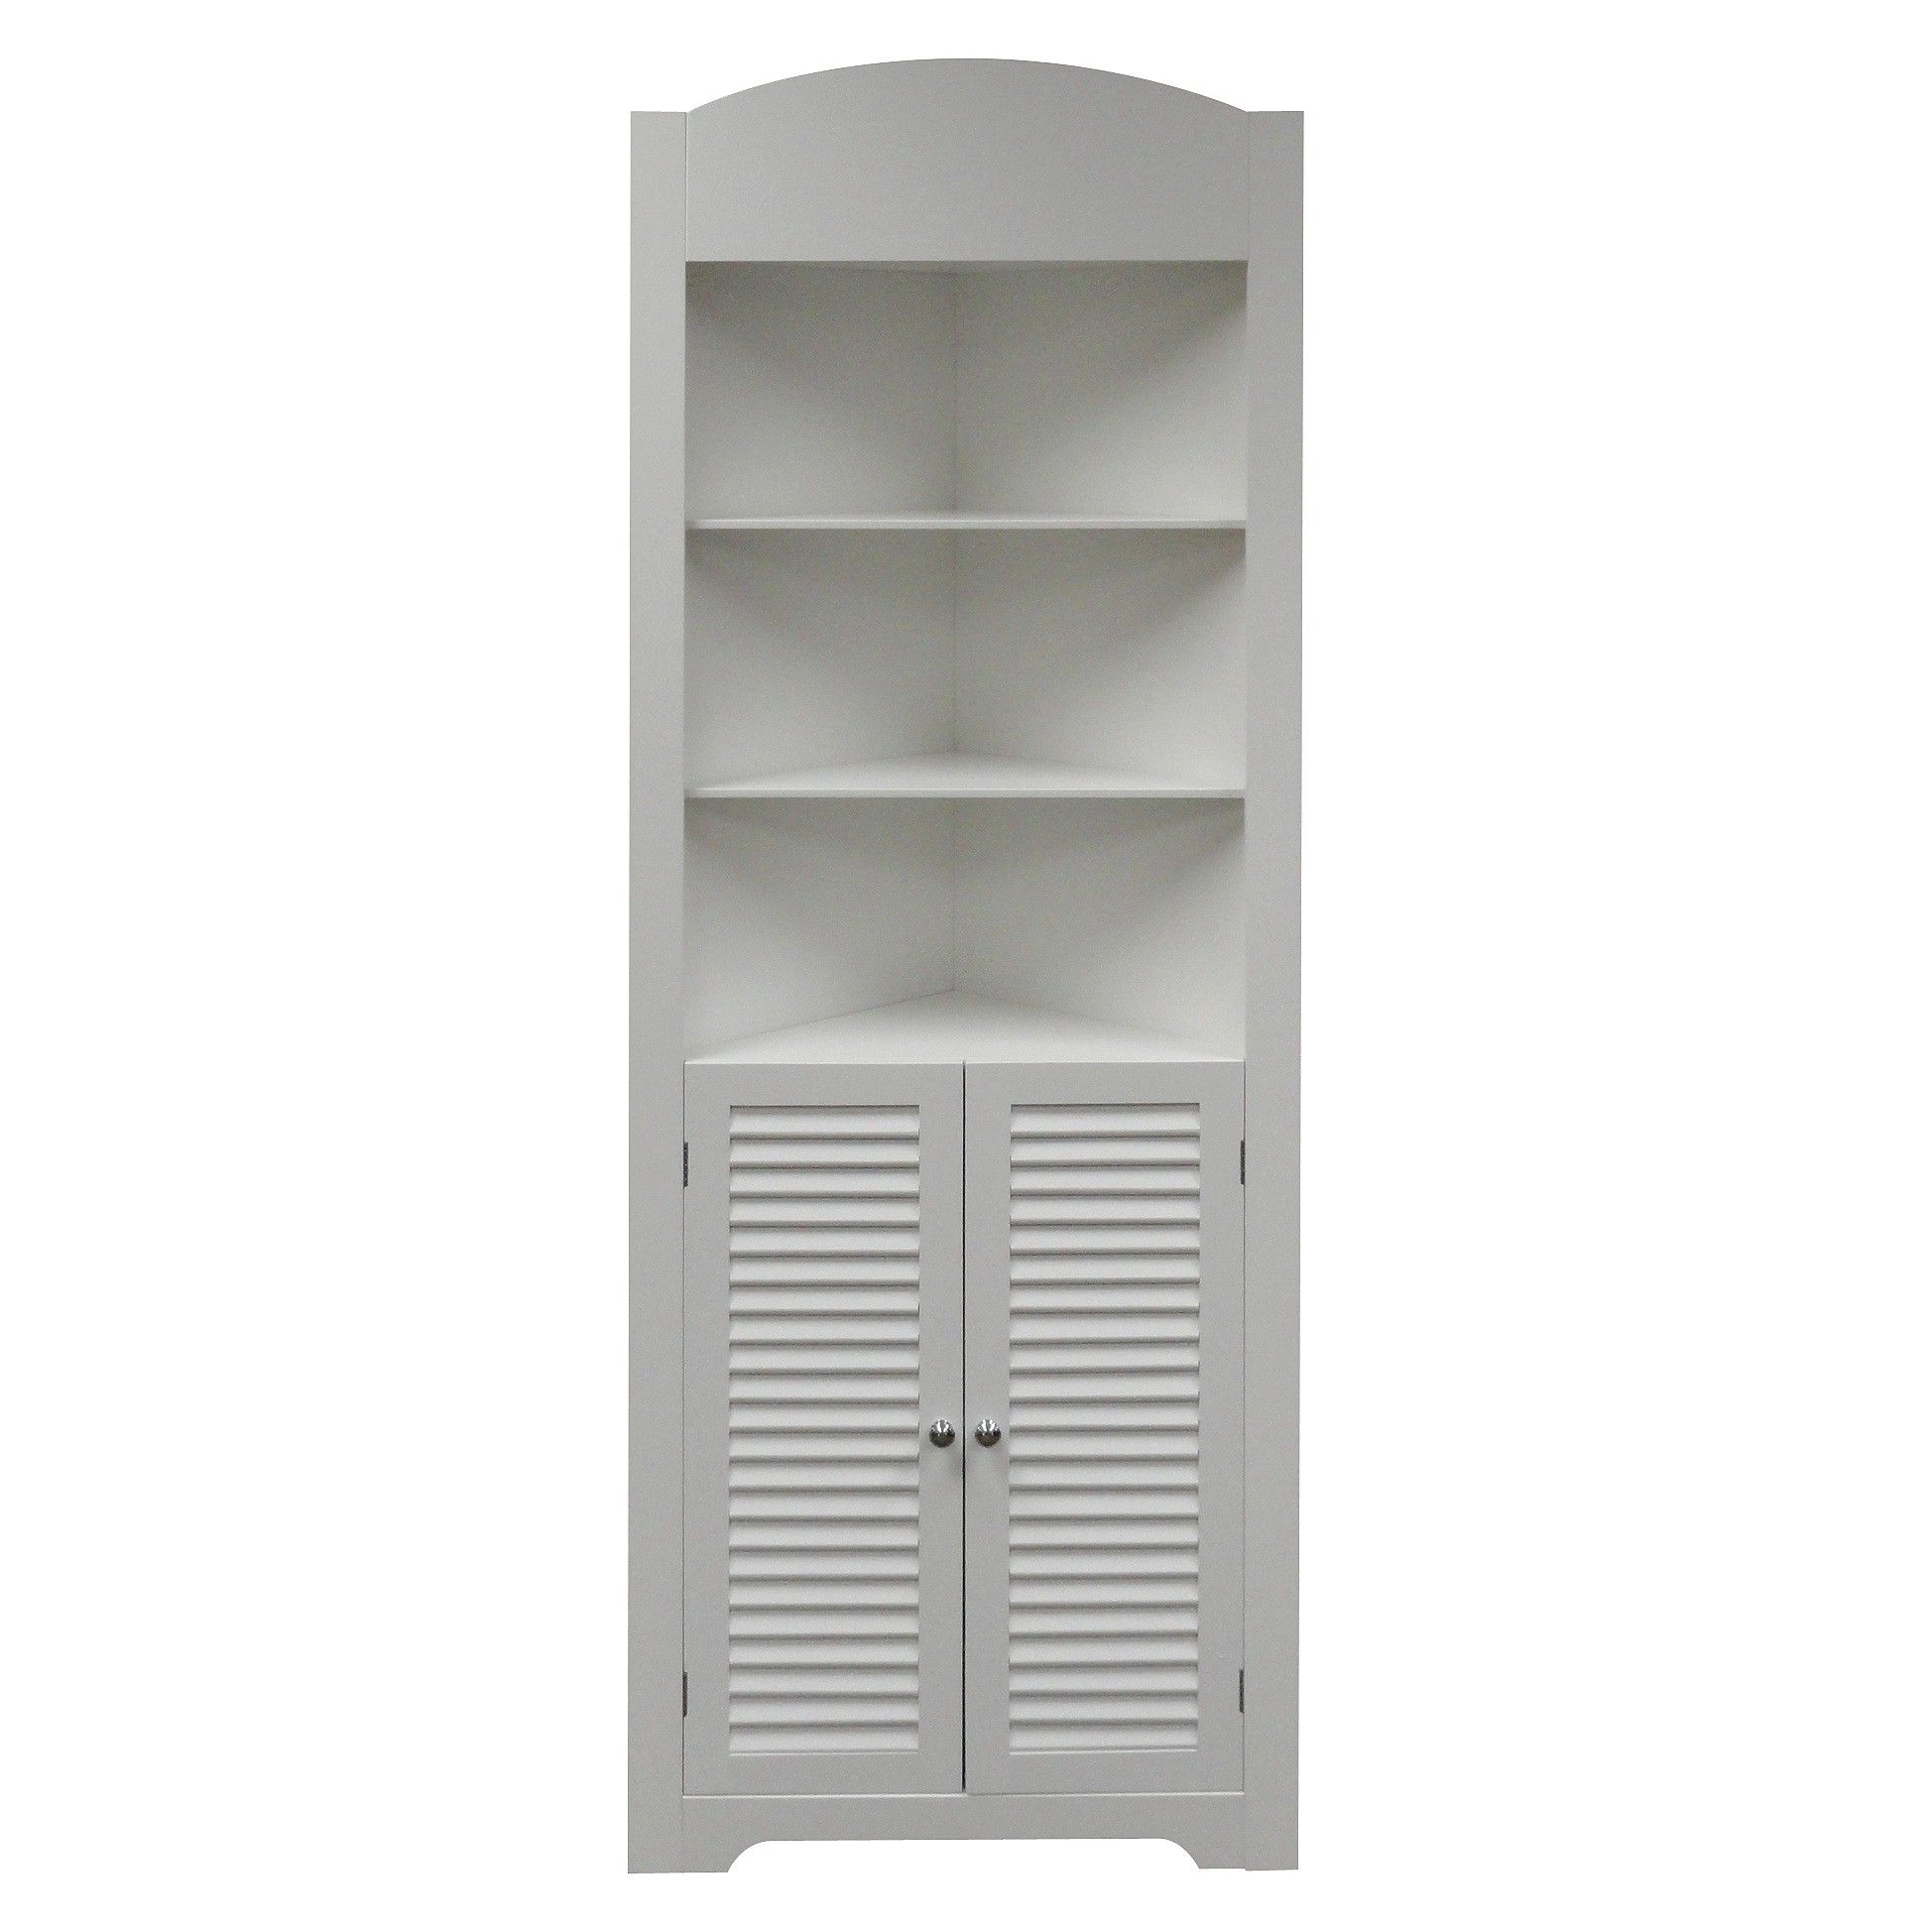 Riverridge Home Products Ellsworth Tall Corner Etagere With Three Open Shelves On Top